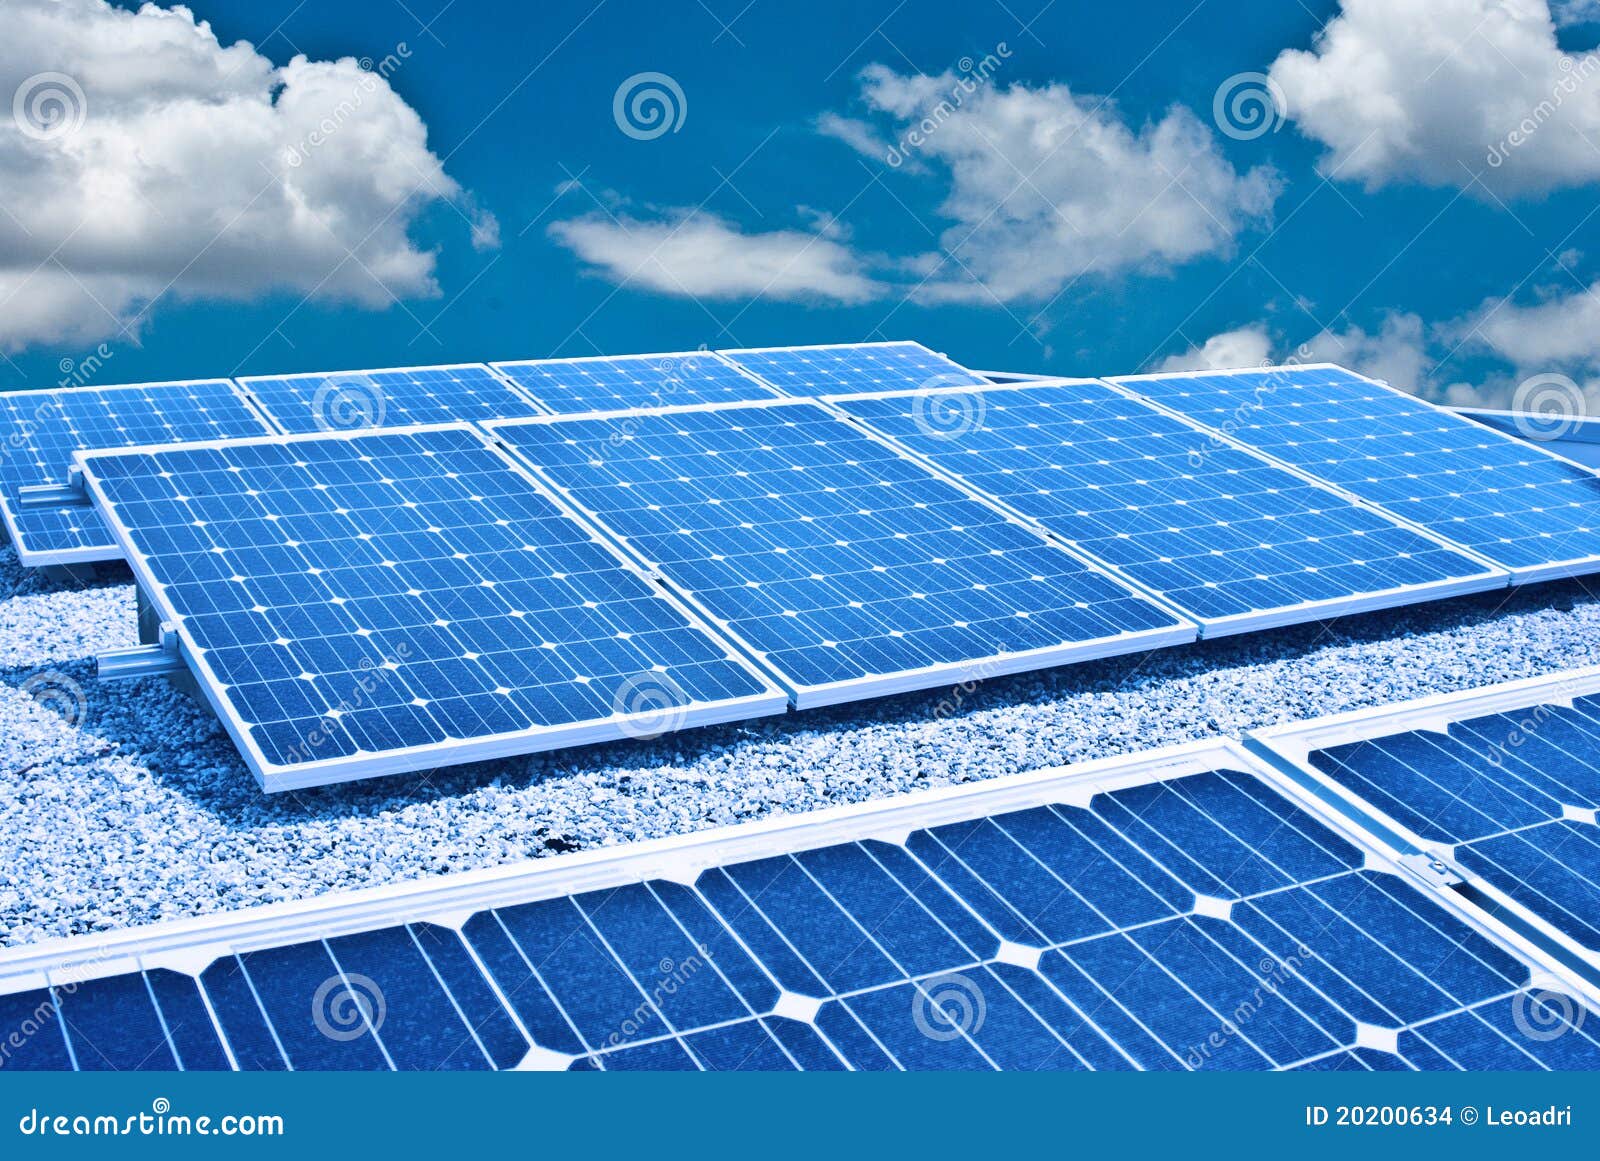 solar panel and photovoltaic. the future's energy